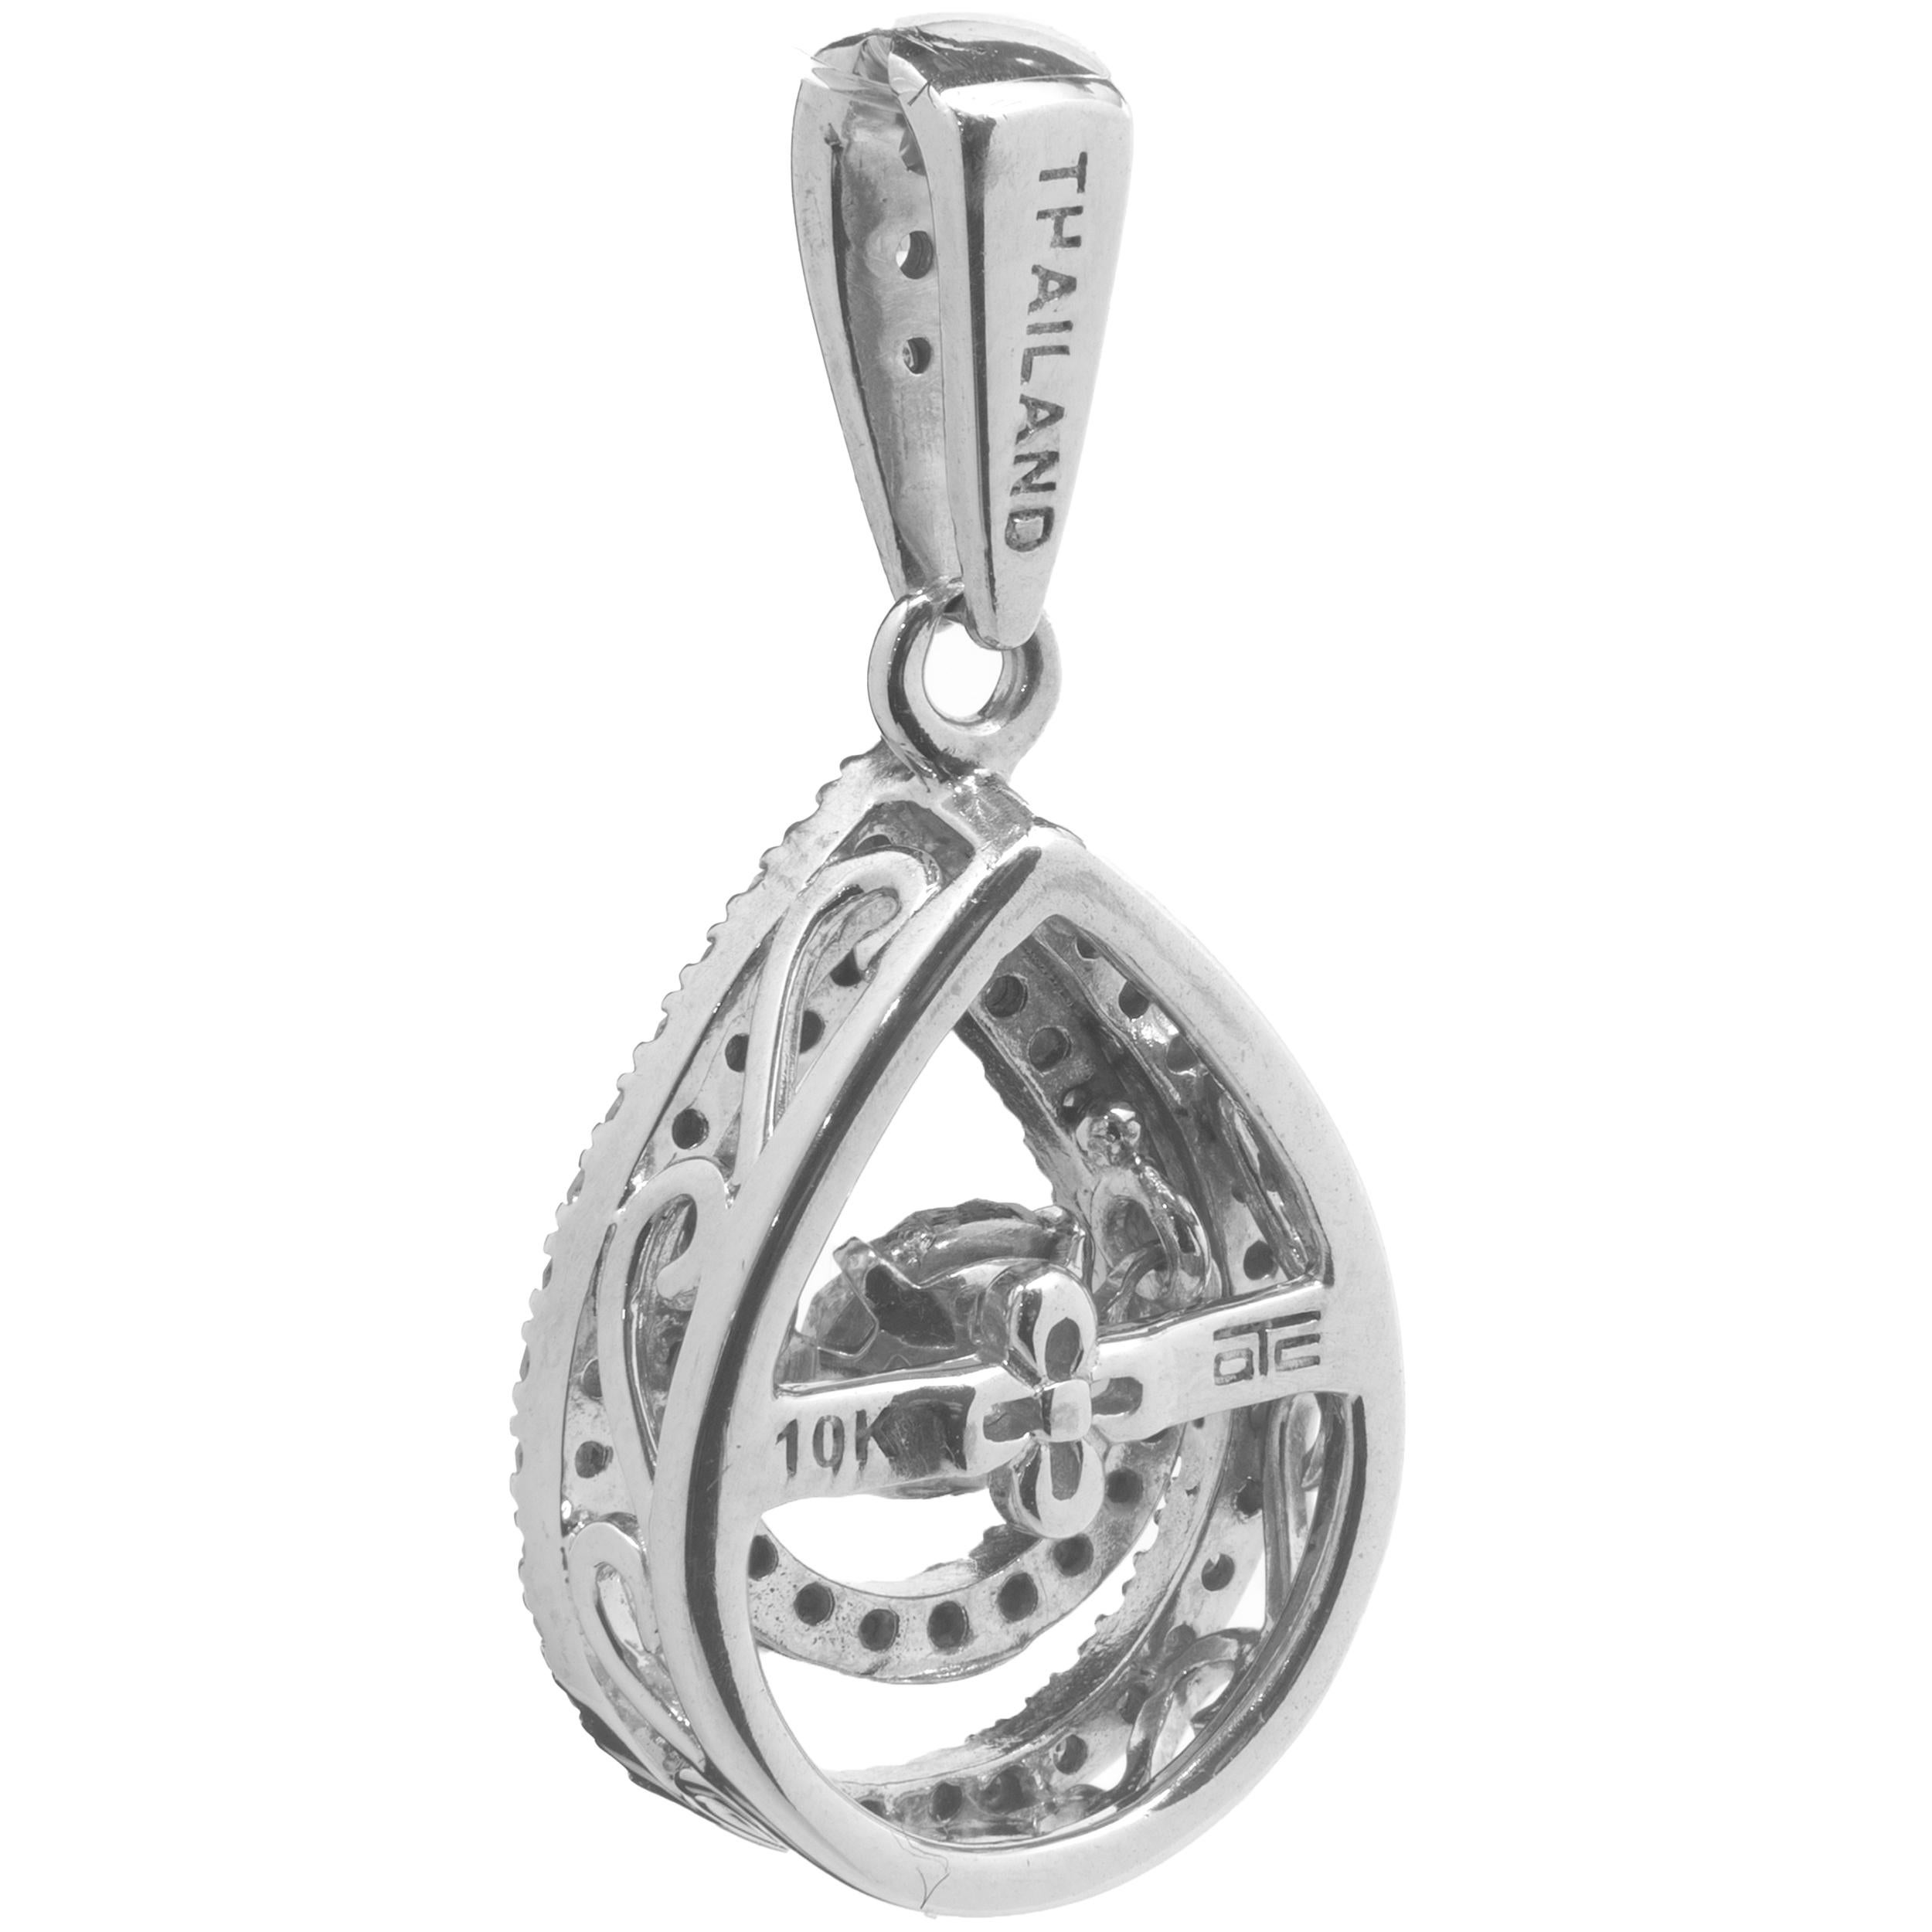 Material: 10K white gold
Diamond:  round brilliant cut = .25cttw
Color: H
Clarity: SI2
Dimensions: pendant measures 22.60mm in length
Weight: 1.65 grams
